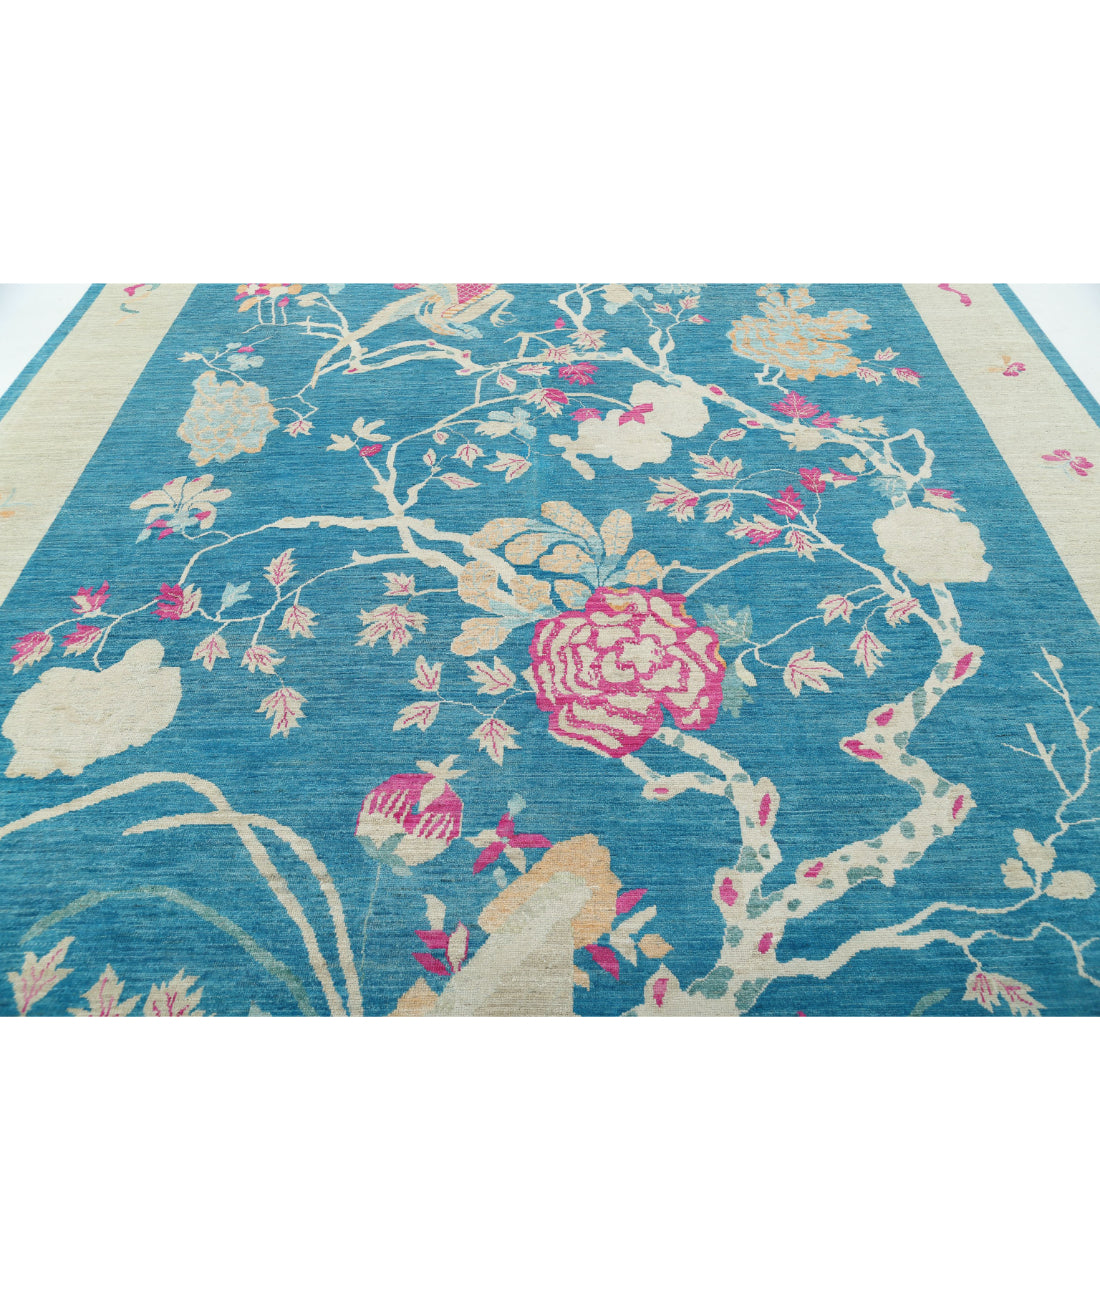 Chinese 10'2'' X 13'8'' Hand-Knotted Wool Rug 10'2'' x 13'8'' (305 X 410) / Blue / Ivory